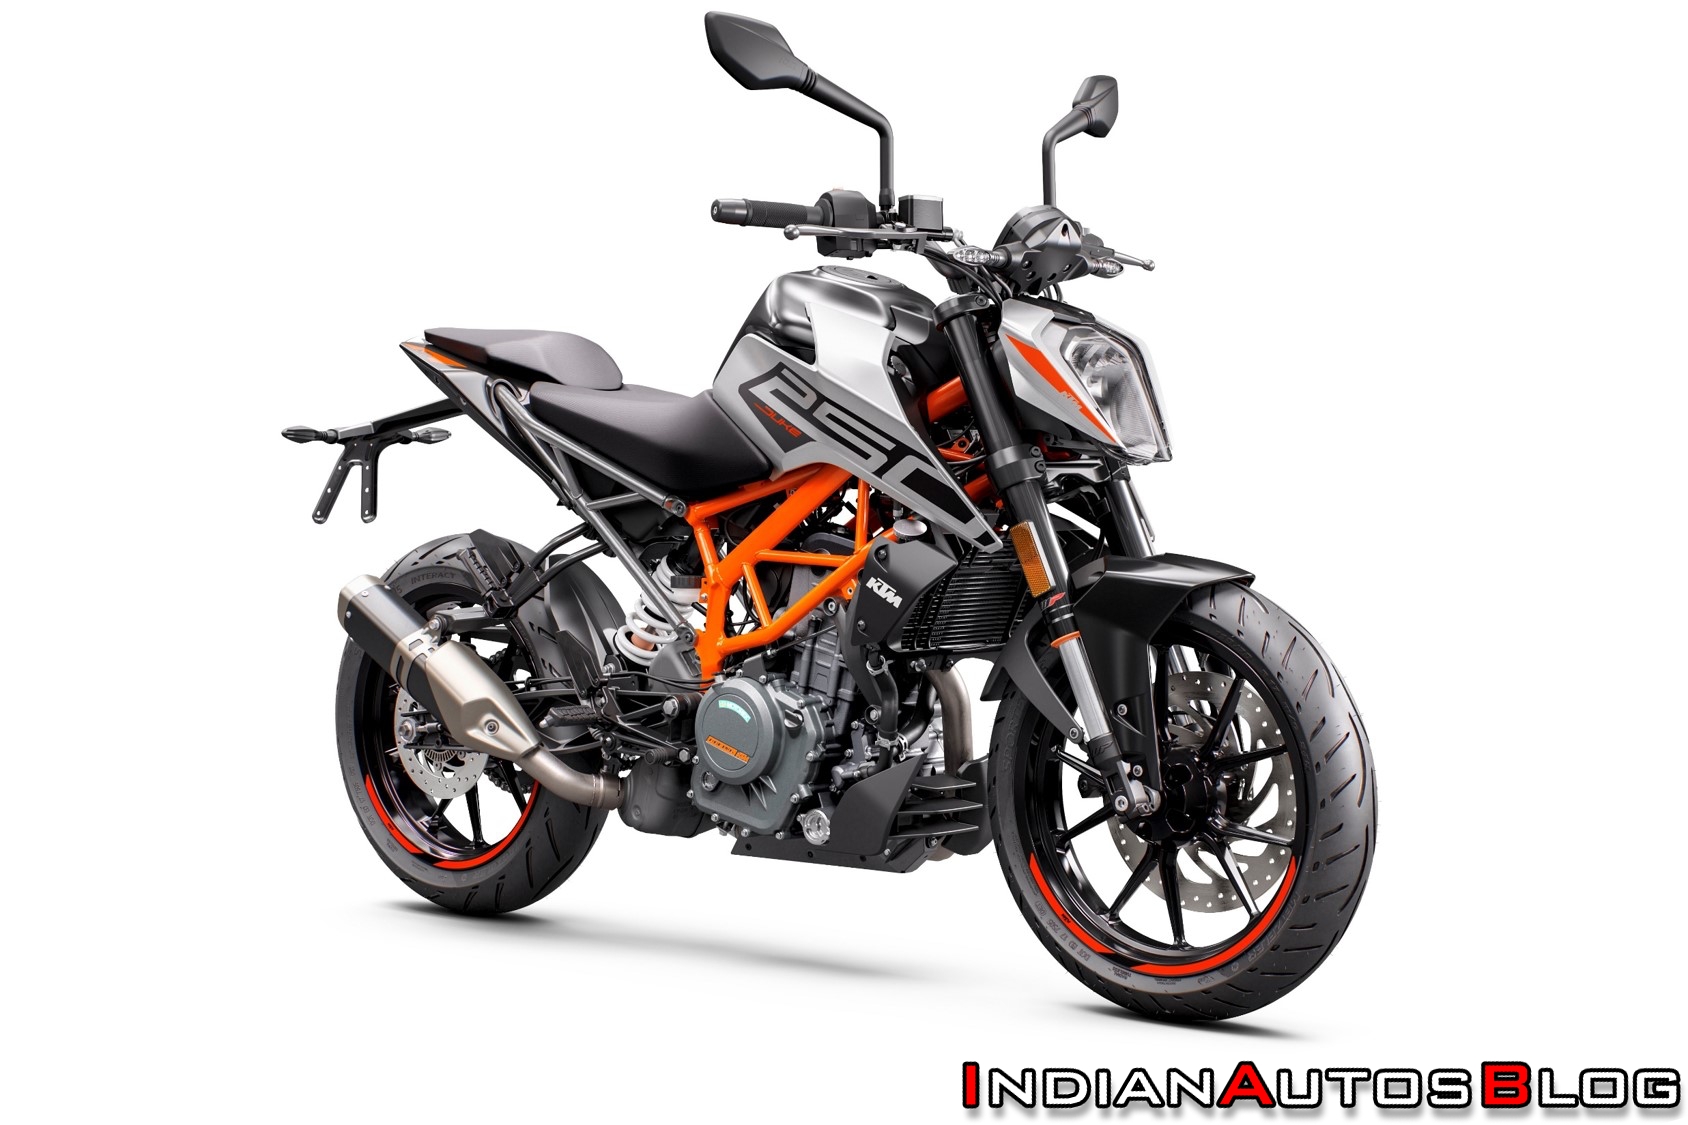 BS-VI compliant KTM Duke and RC range launched - Prices, Specs